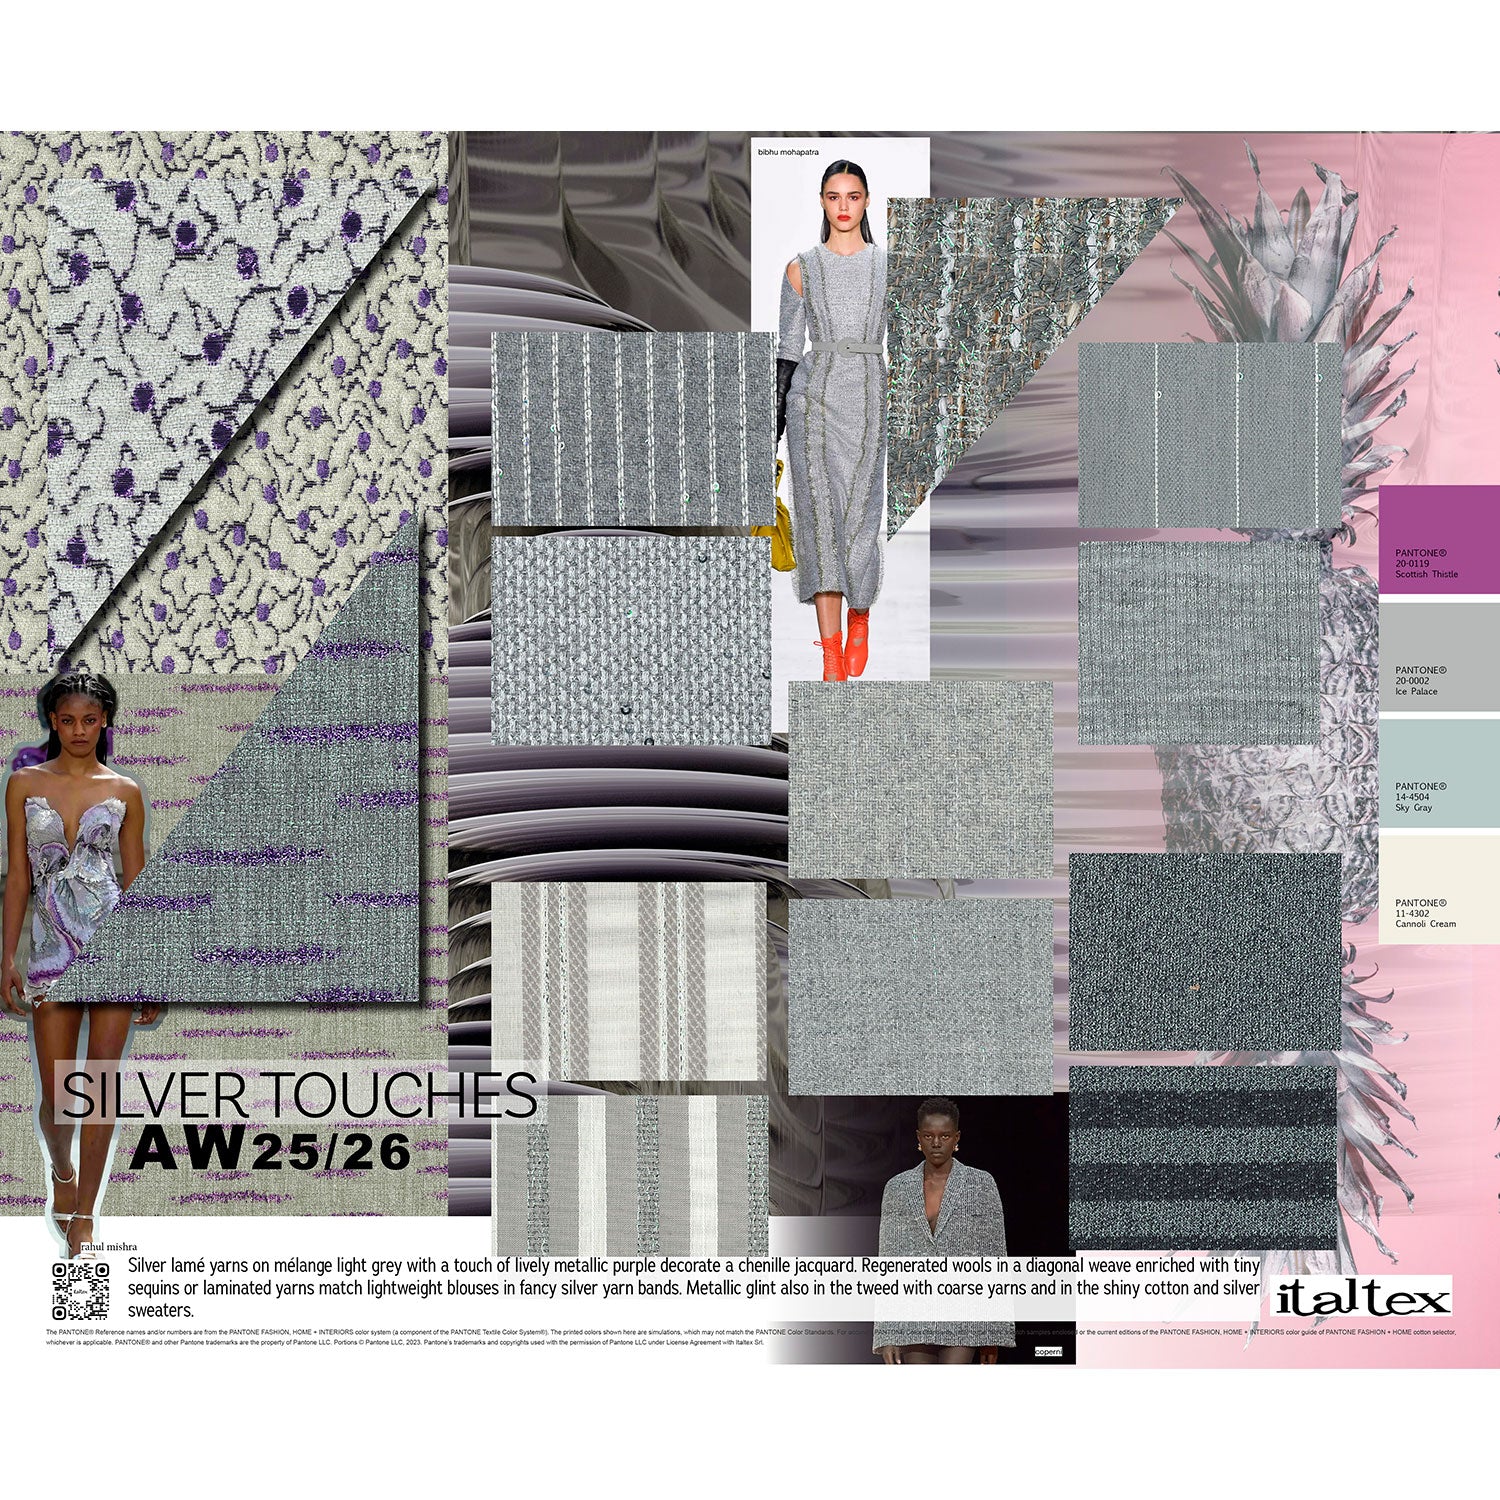 Twelve grey fabric swatches for womenswear fall winter 2025-26. Two textured jacquards with a touch of purple and silver. Two lightweight fabrics for blouses in striped patterns where grey matches white. Four woven fabrics in wool with silver decorations. One has silver sequin yarns. Four knitted fabrics with a hint of silver: one is ribbed, one is solid and one has horizontal dark grey stripes  